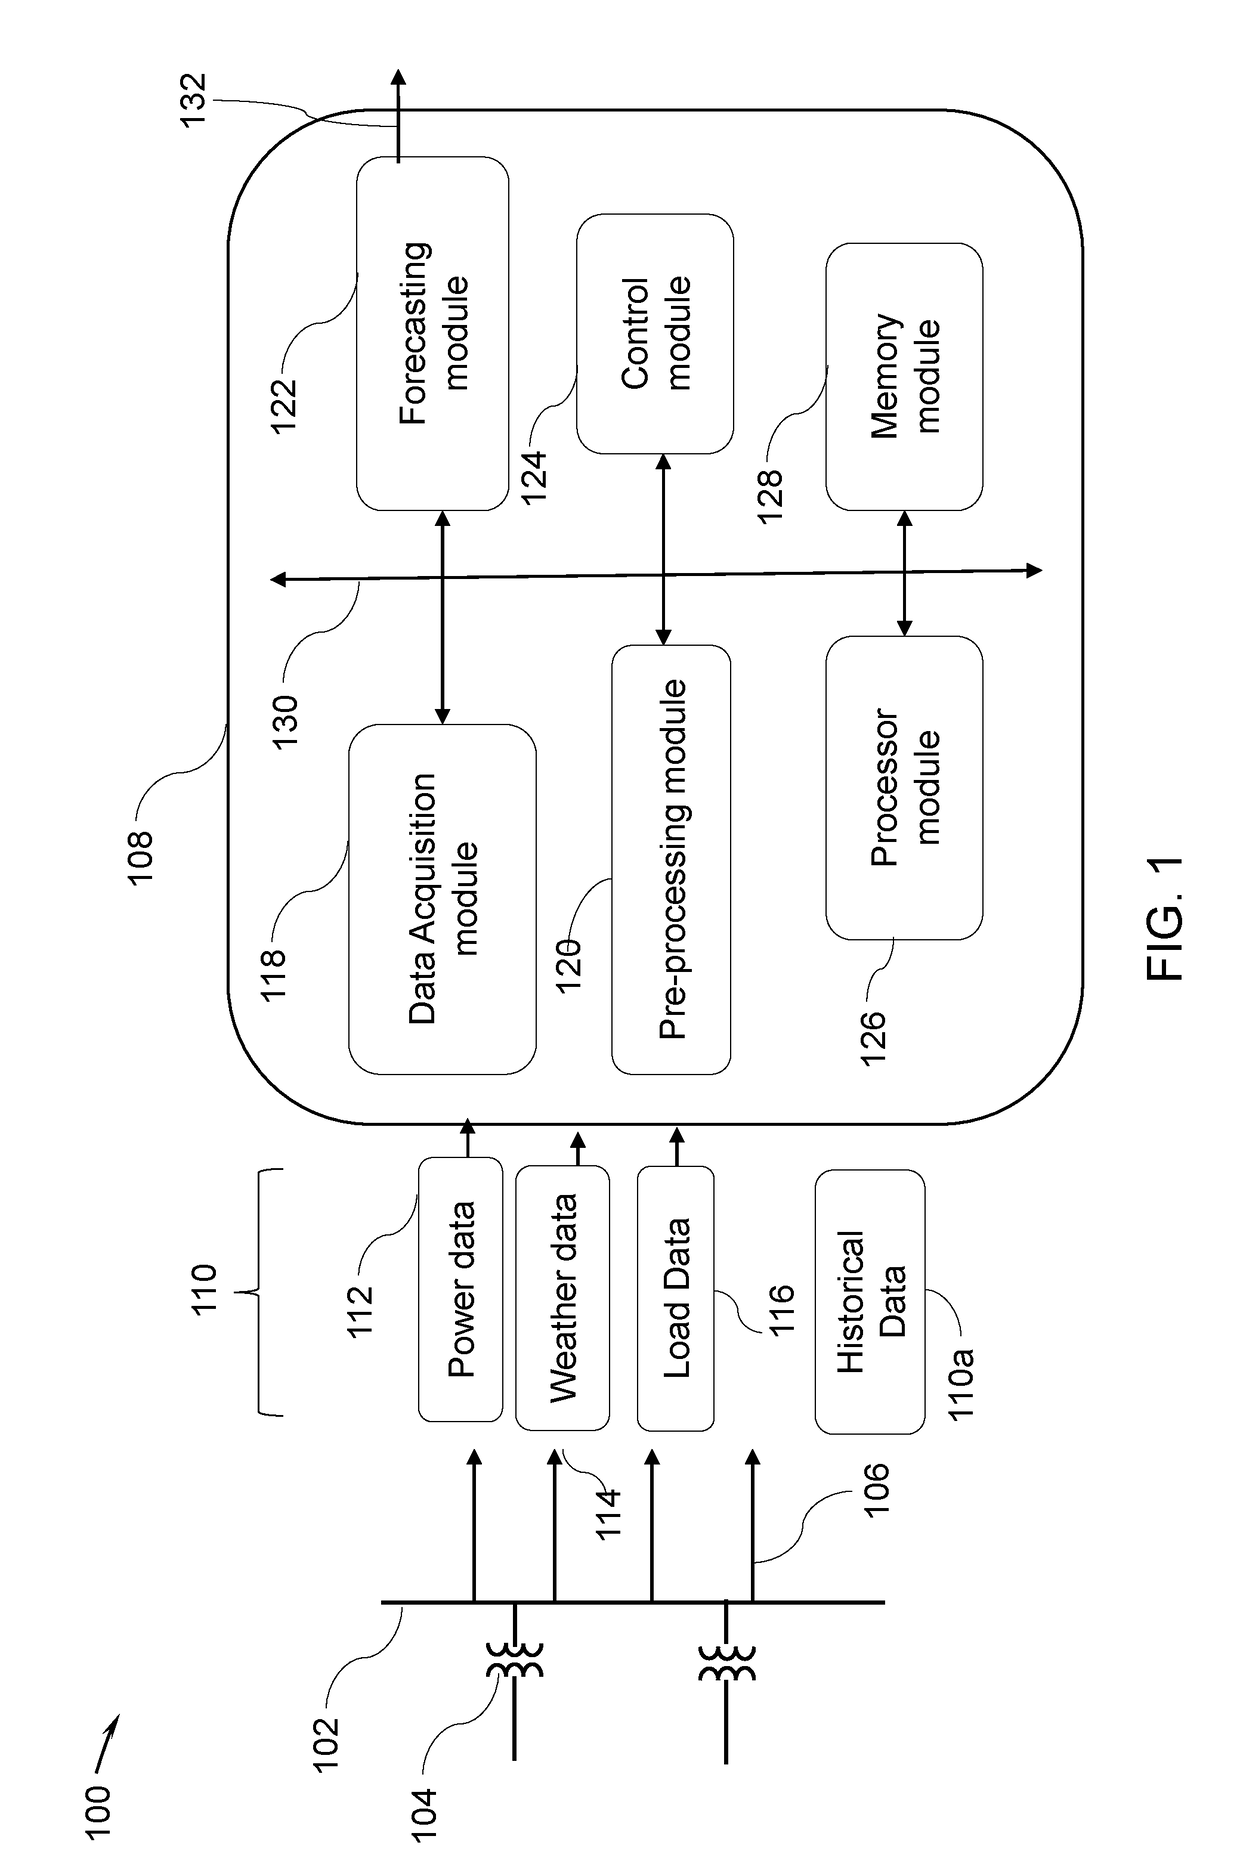 System and method for distribution load forecasting in a power grid